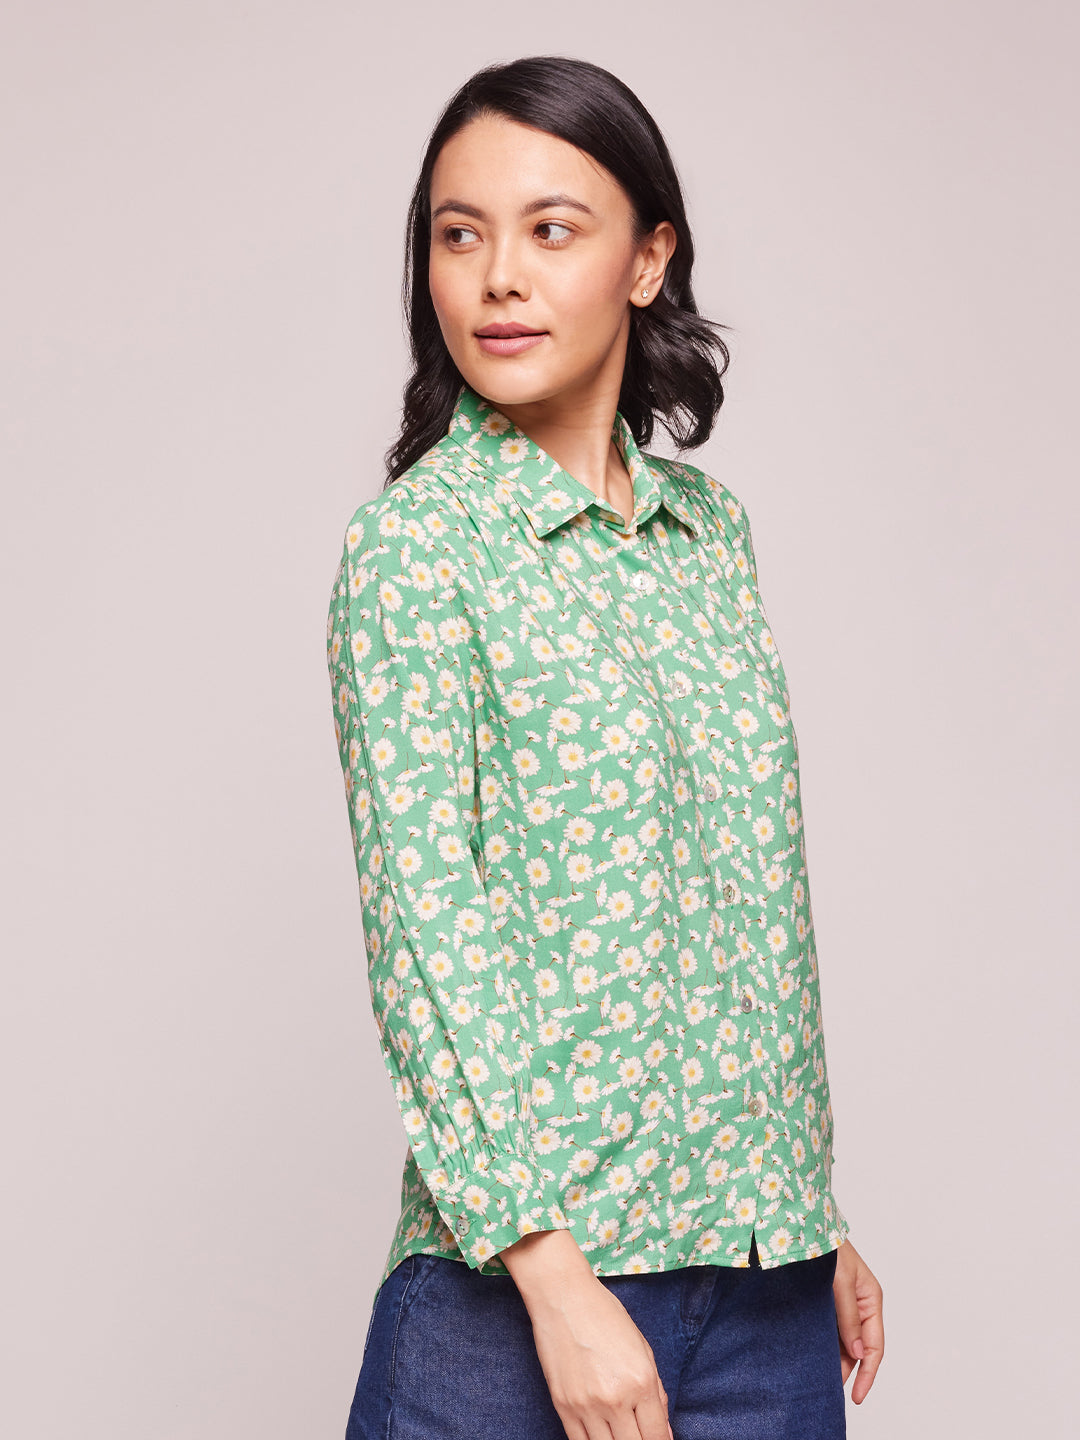 Bombay High Women's Full Sleeve Floral Print Relaxed Fit Shirt